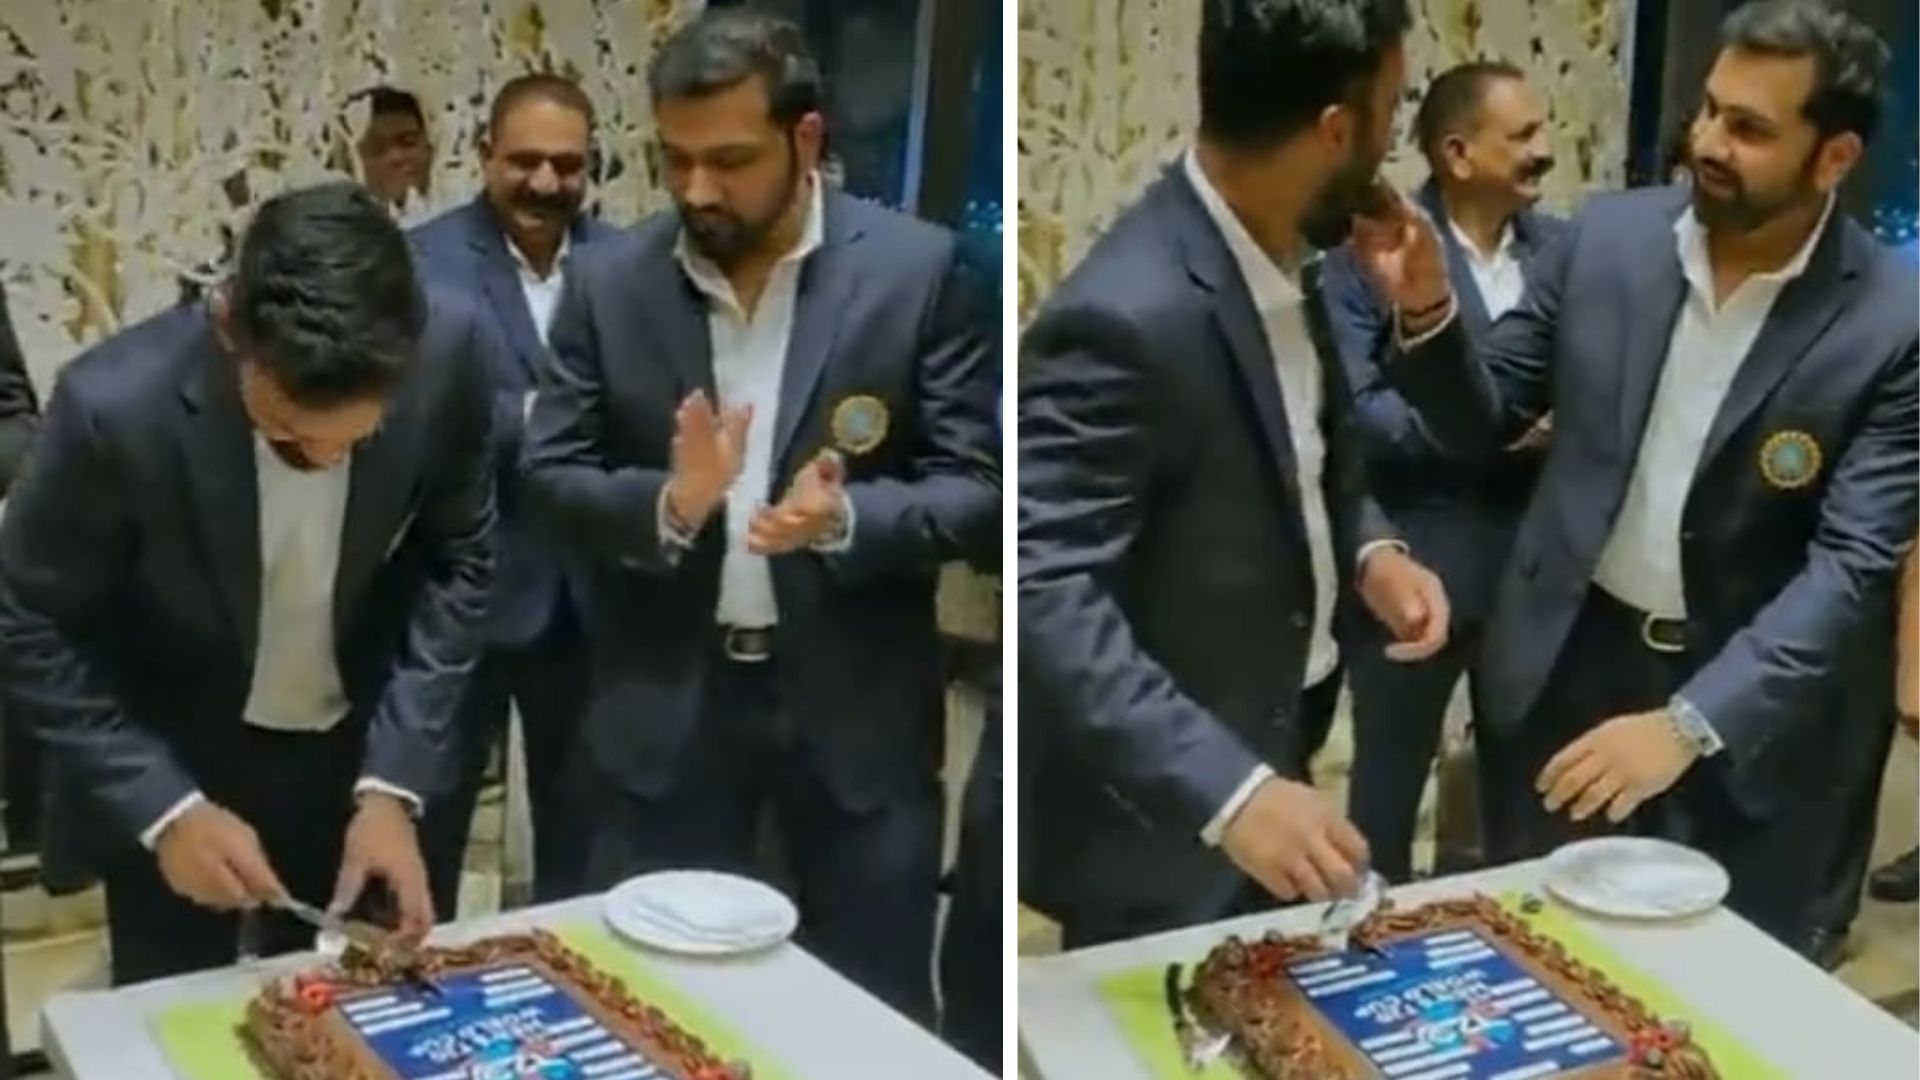 Snippets from the video posted by BCCI (P.C.: BCCI Twitter)